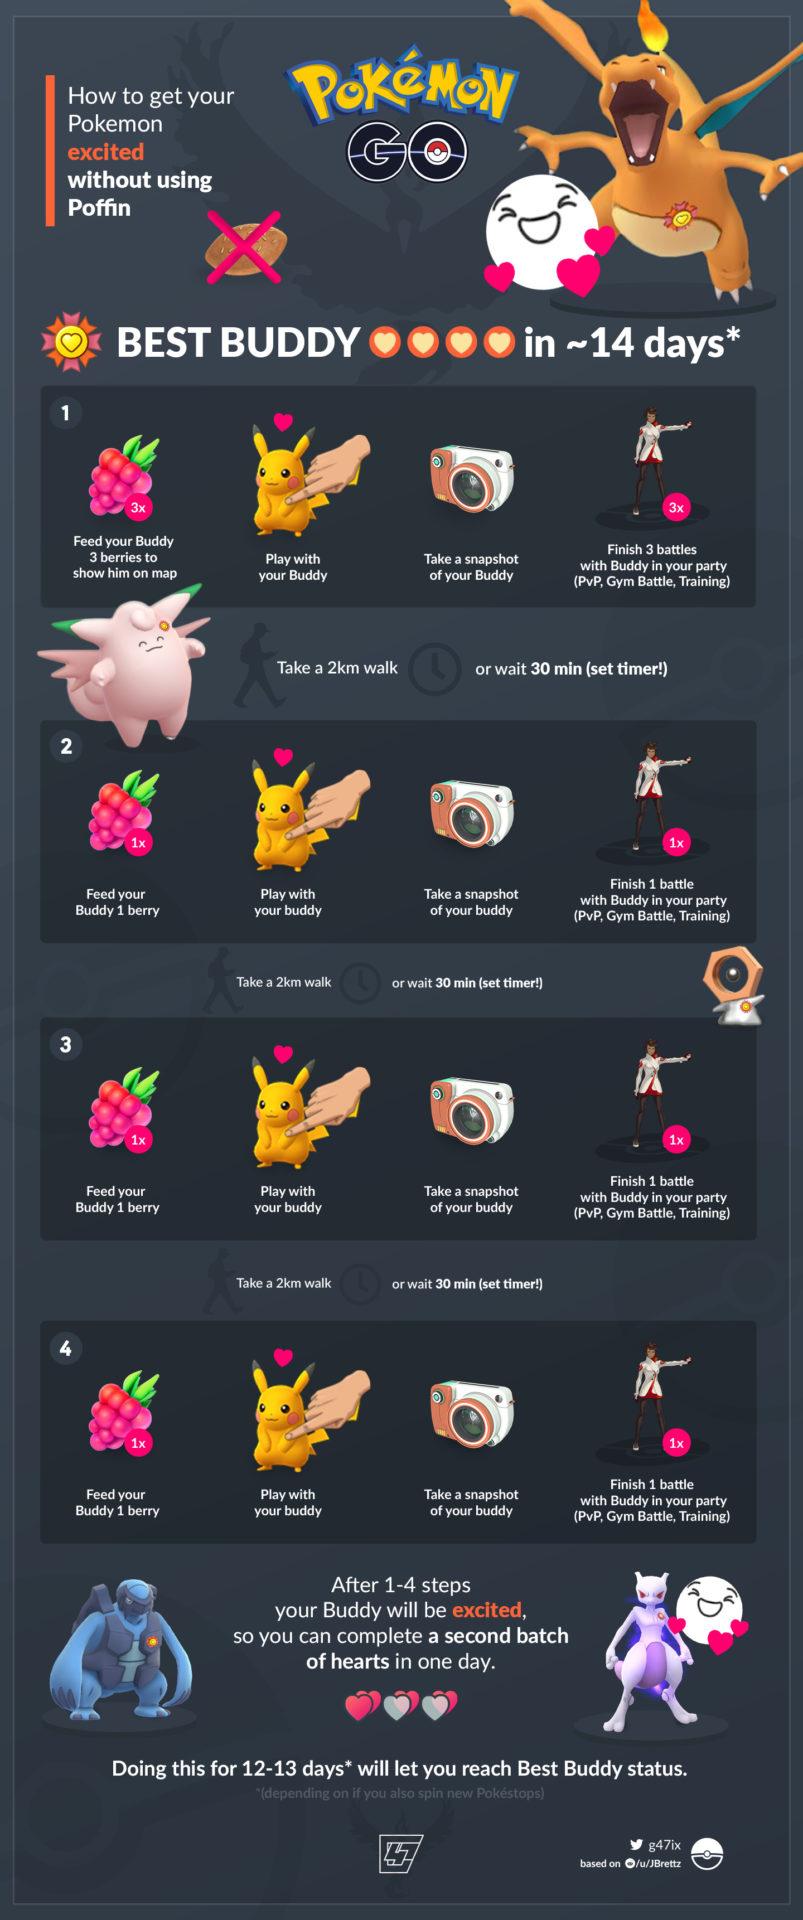 An information graph of the fastest way to get best buddy status in Pokemon go